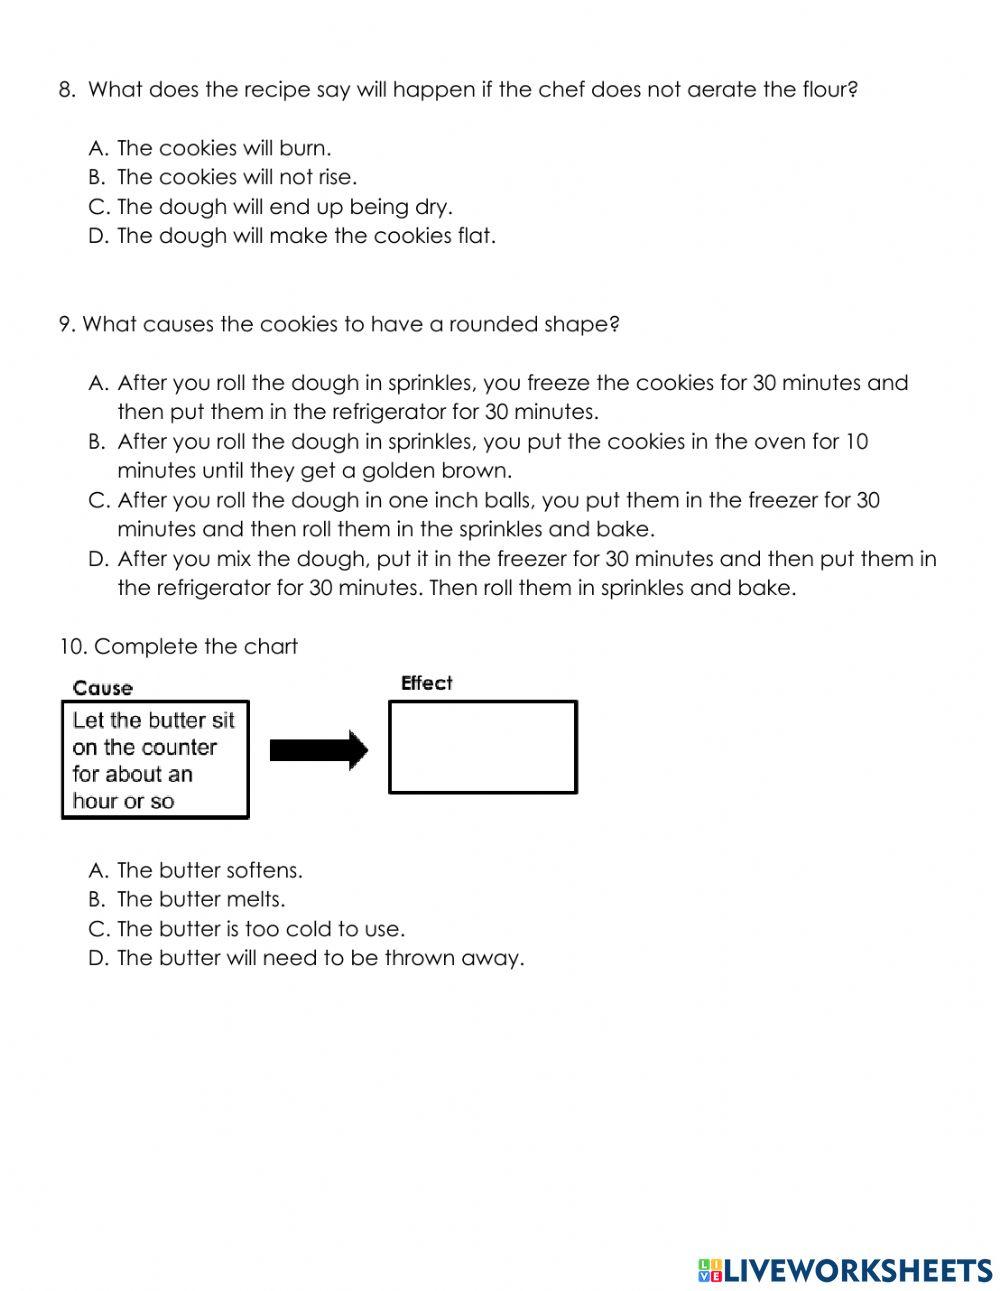 Revised Cause and Effect Quiz